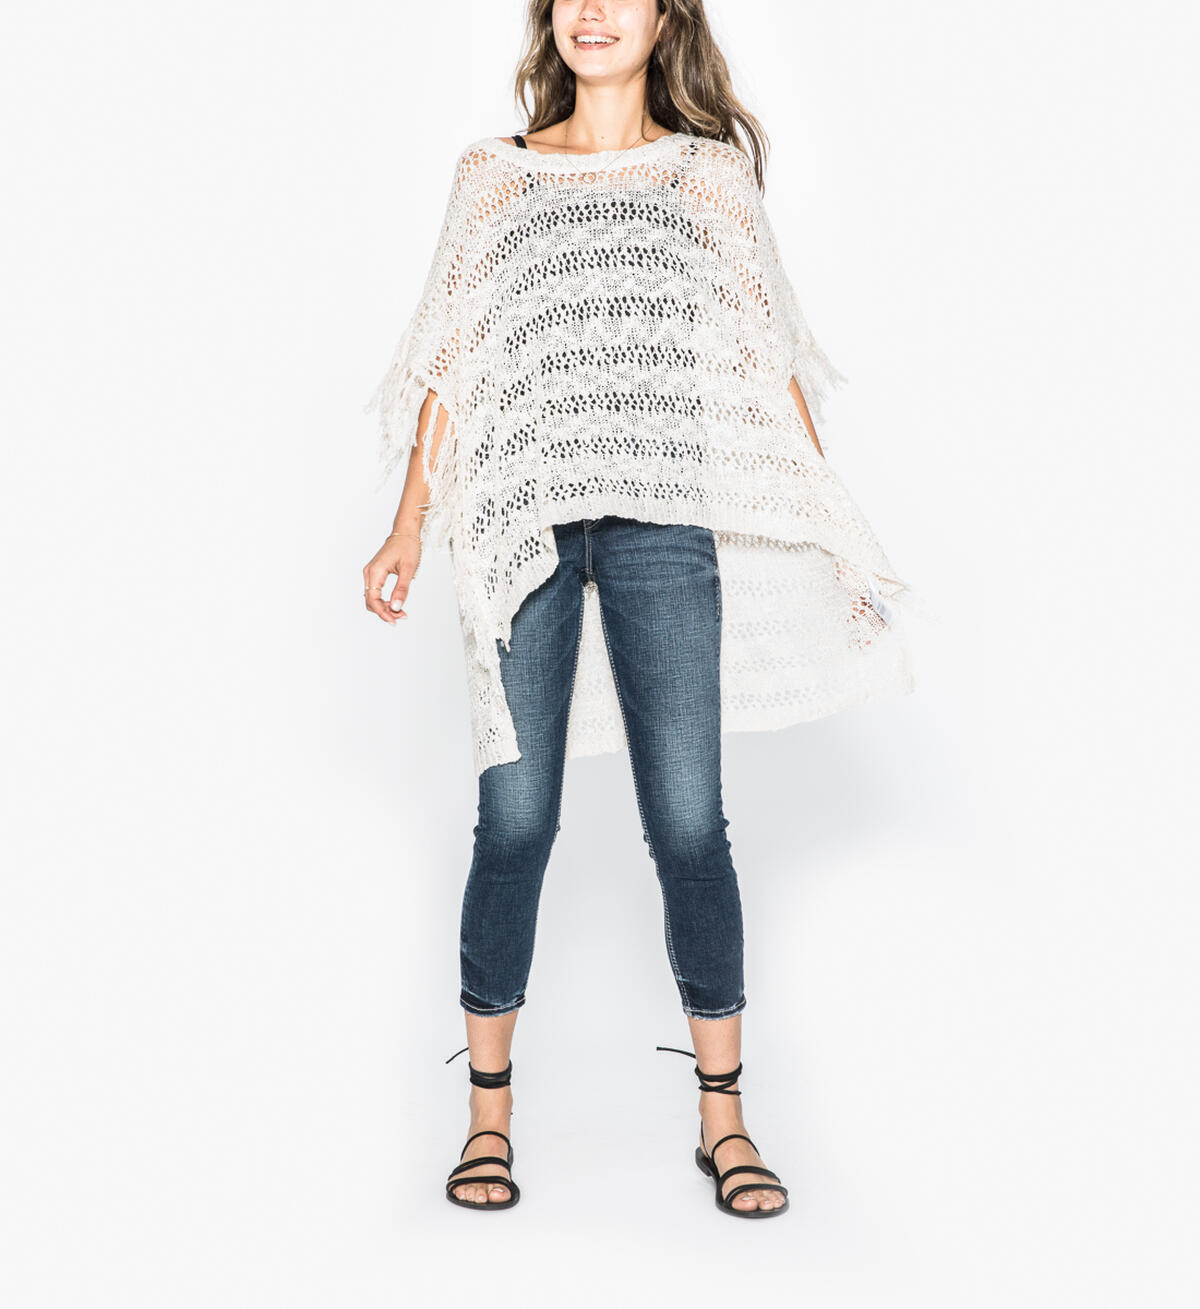 Sierra - Poncho Sweater With Fringe, , hi-res image number 0